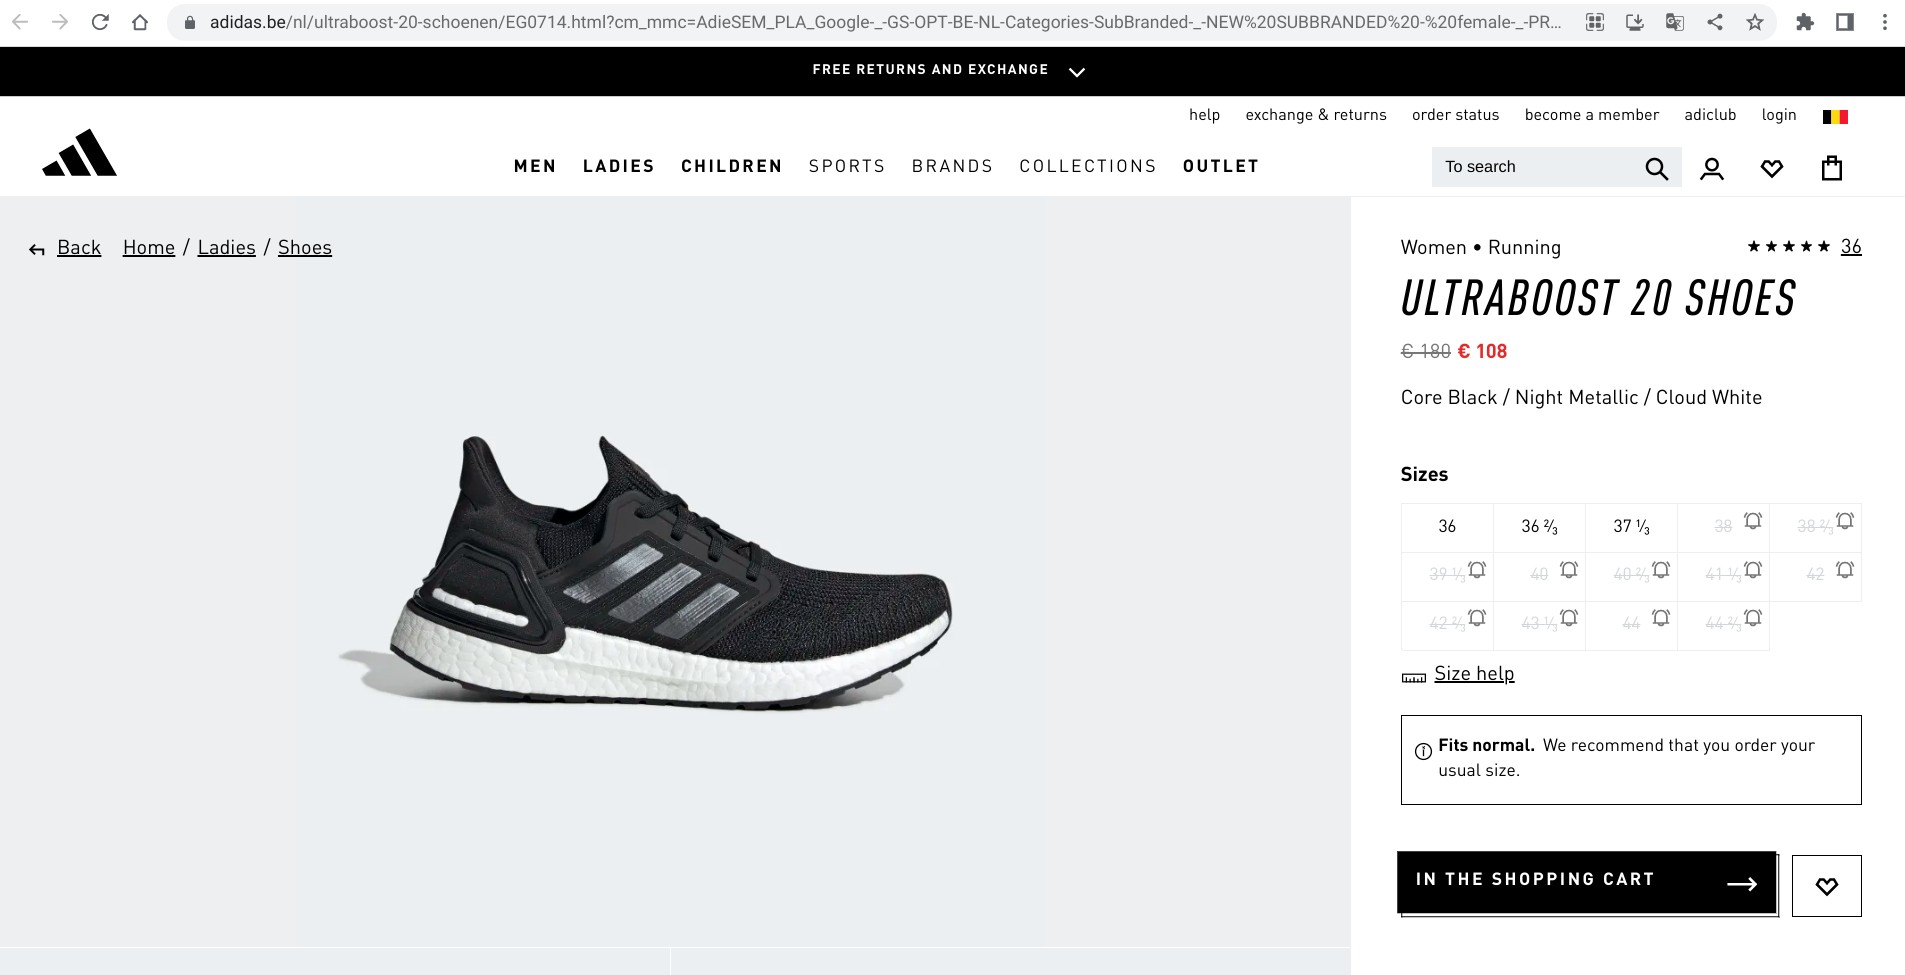 Screenshot of an sneaker listing on adidas.be